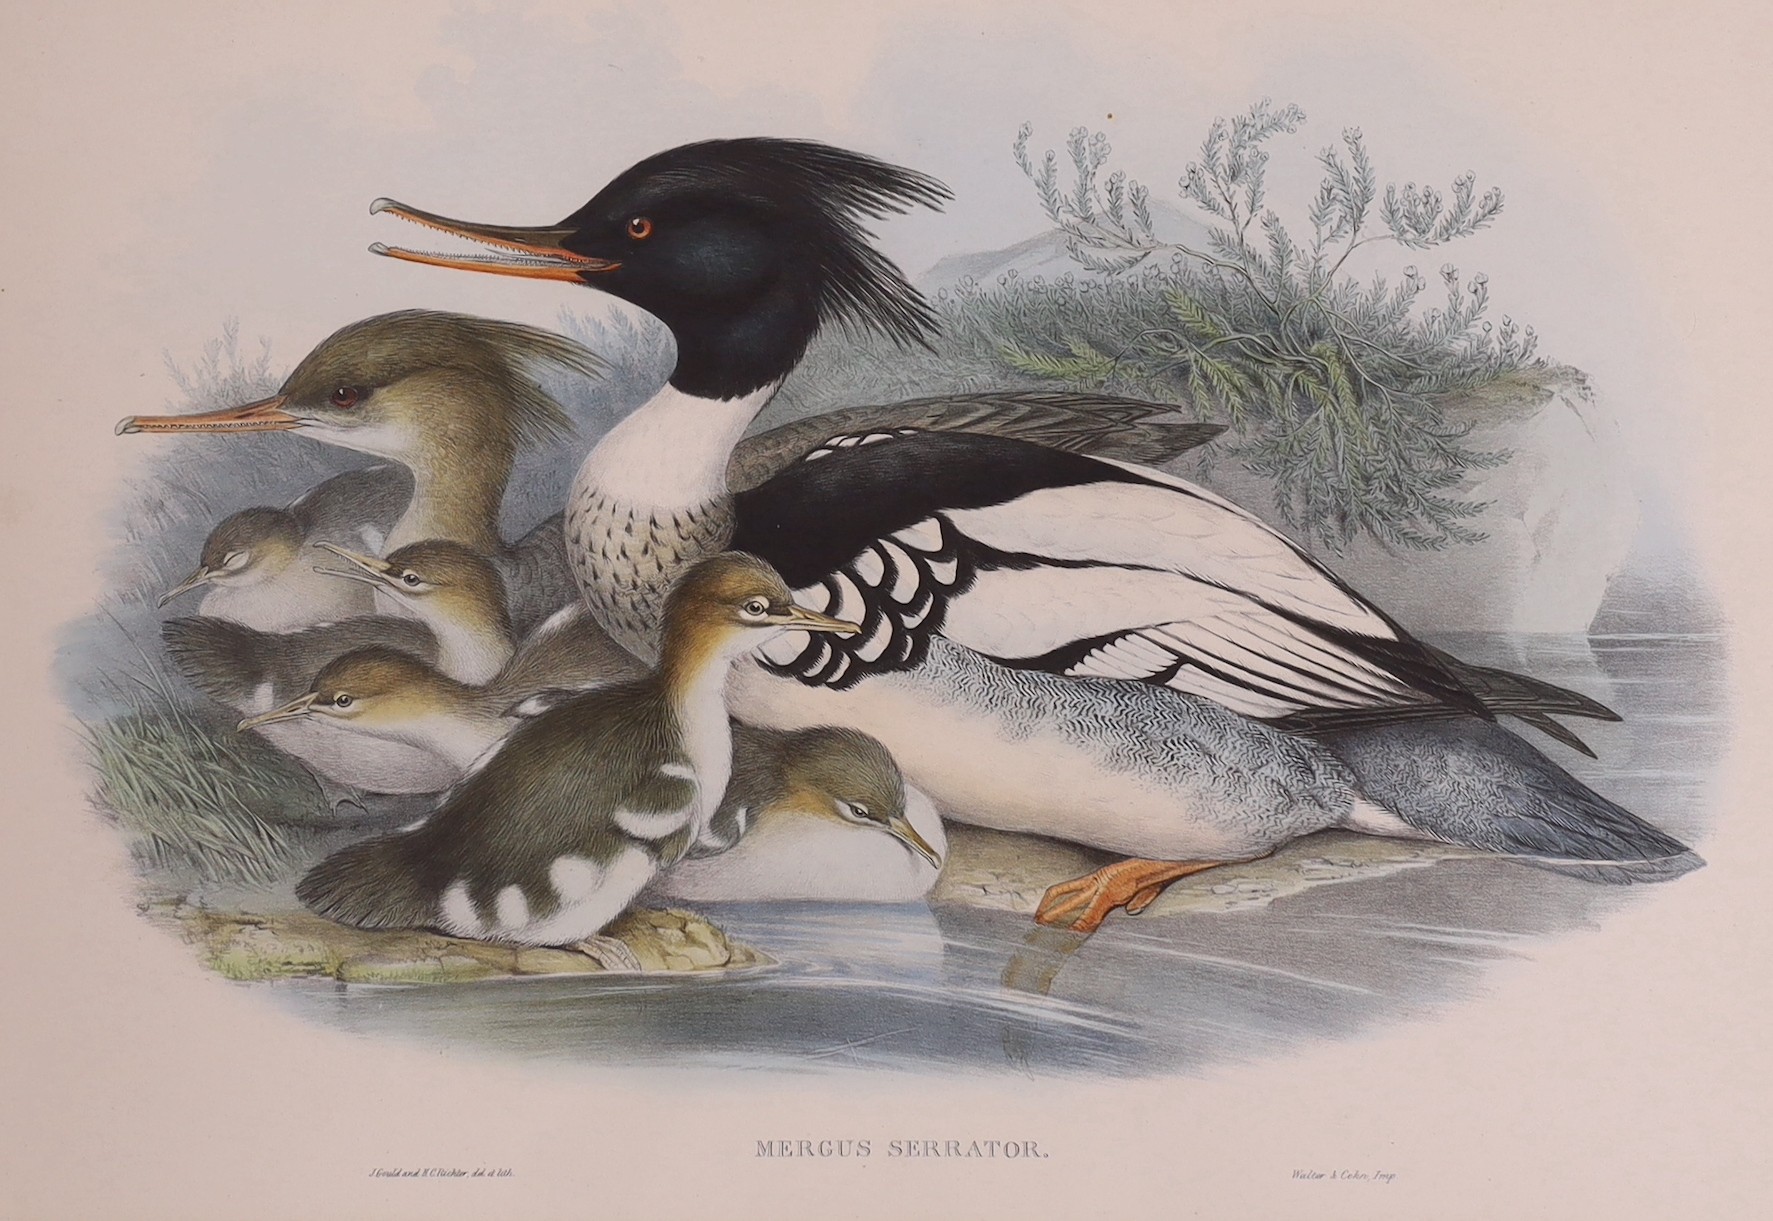 After John Gould, J. Wolf & H.C.Richter, six assorted colour lithographs from The Birds of Great Britain, largest 53 x 36cm